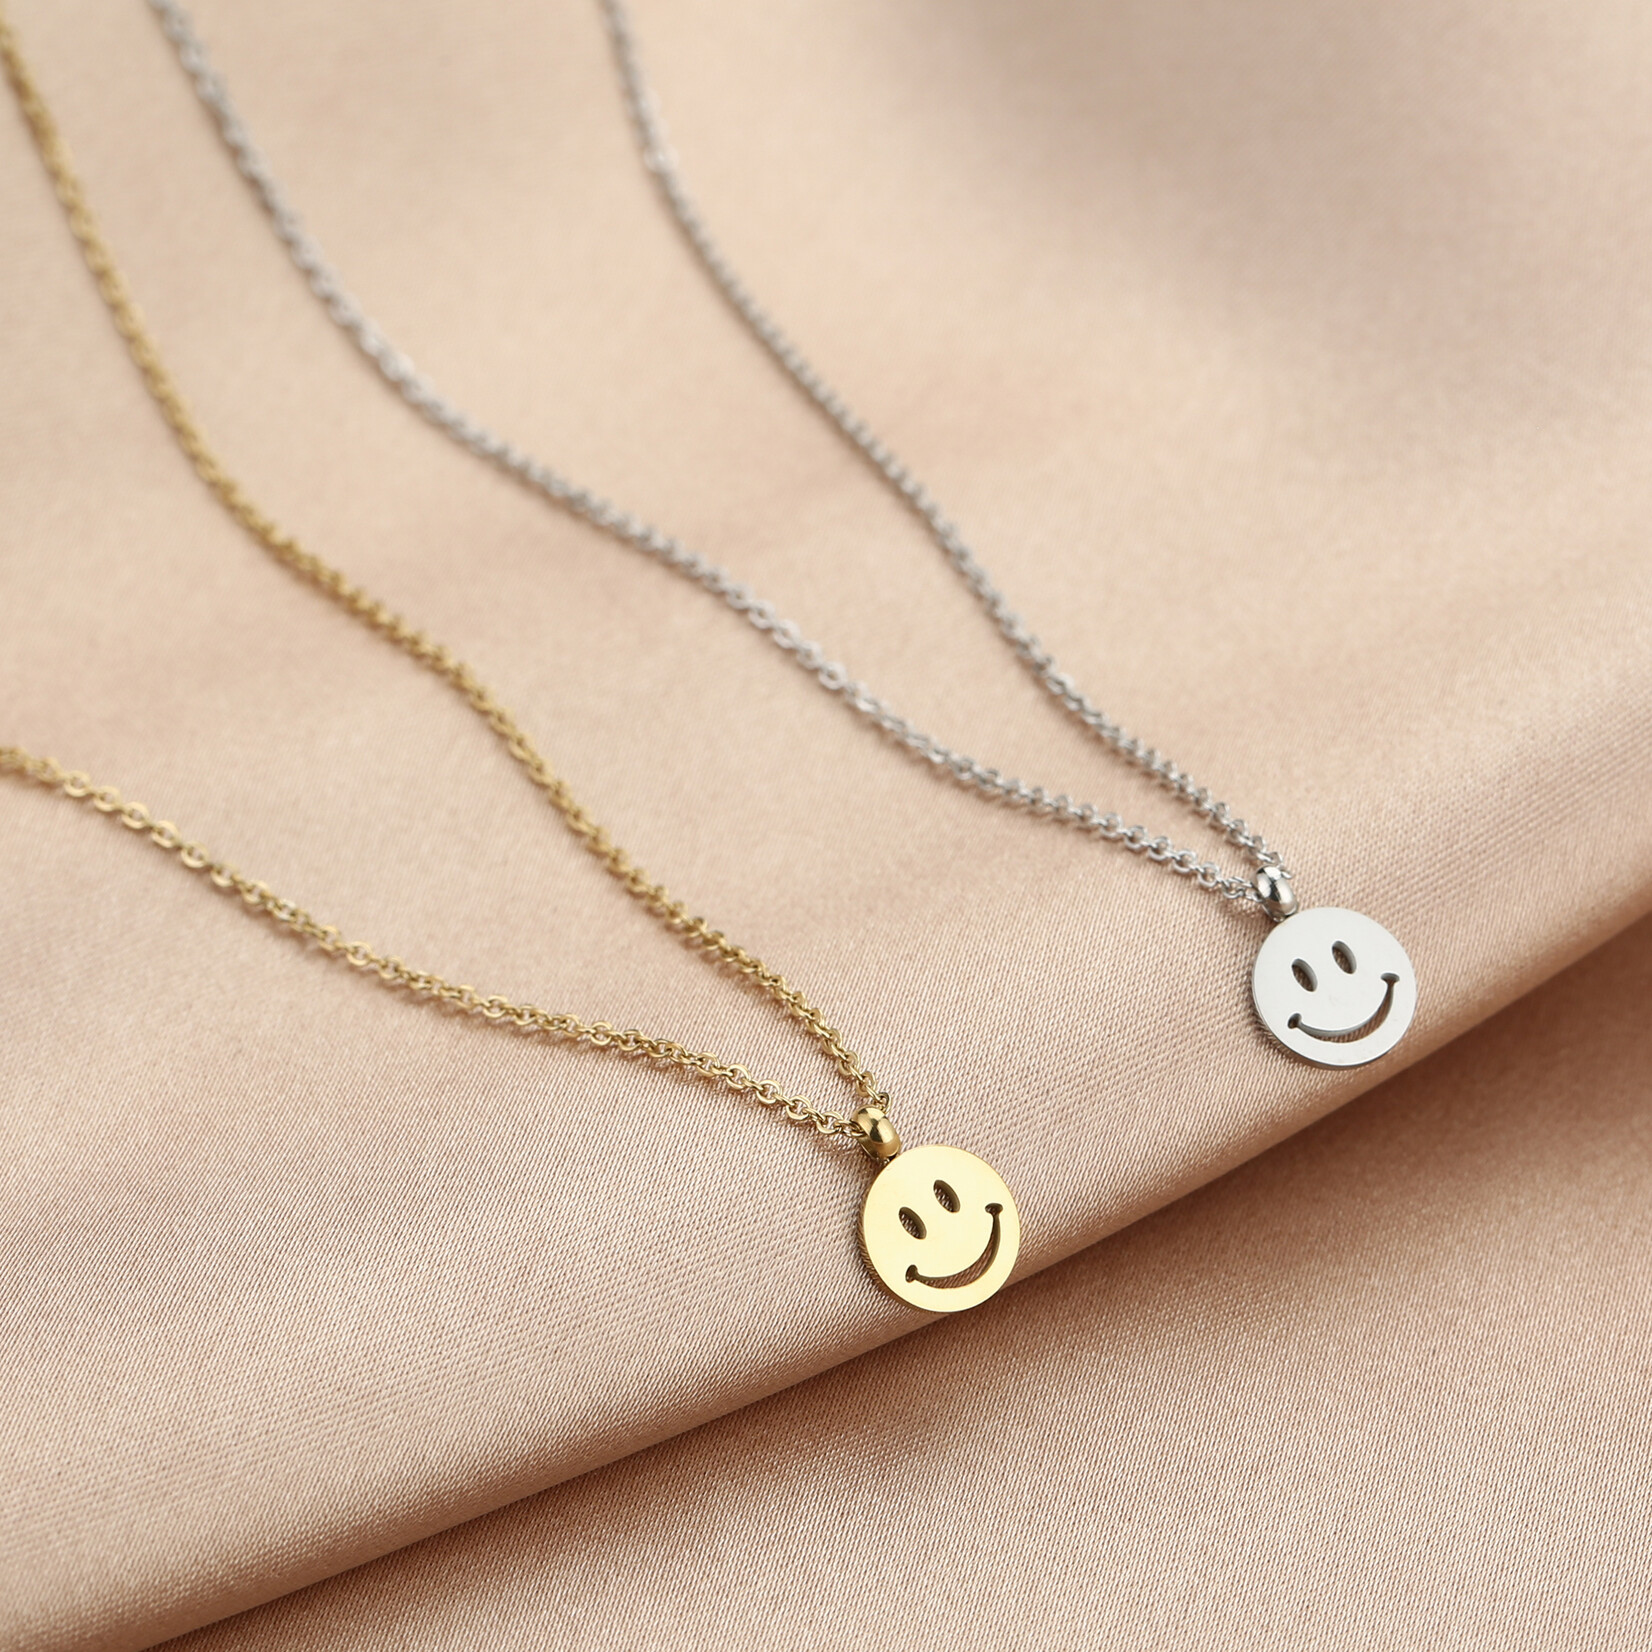 Sun & Sea by Mare Ketting Smiley Face Gold